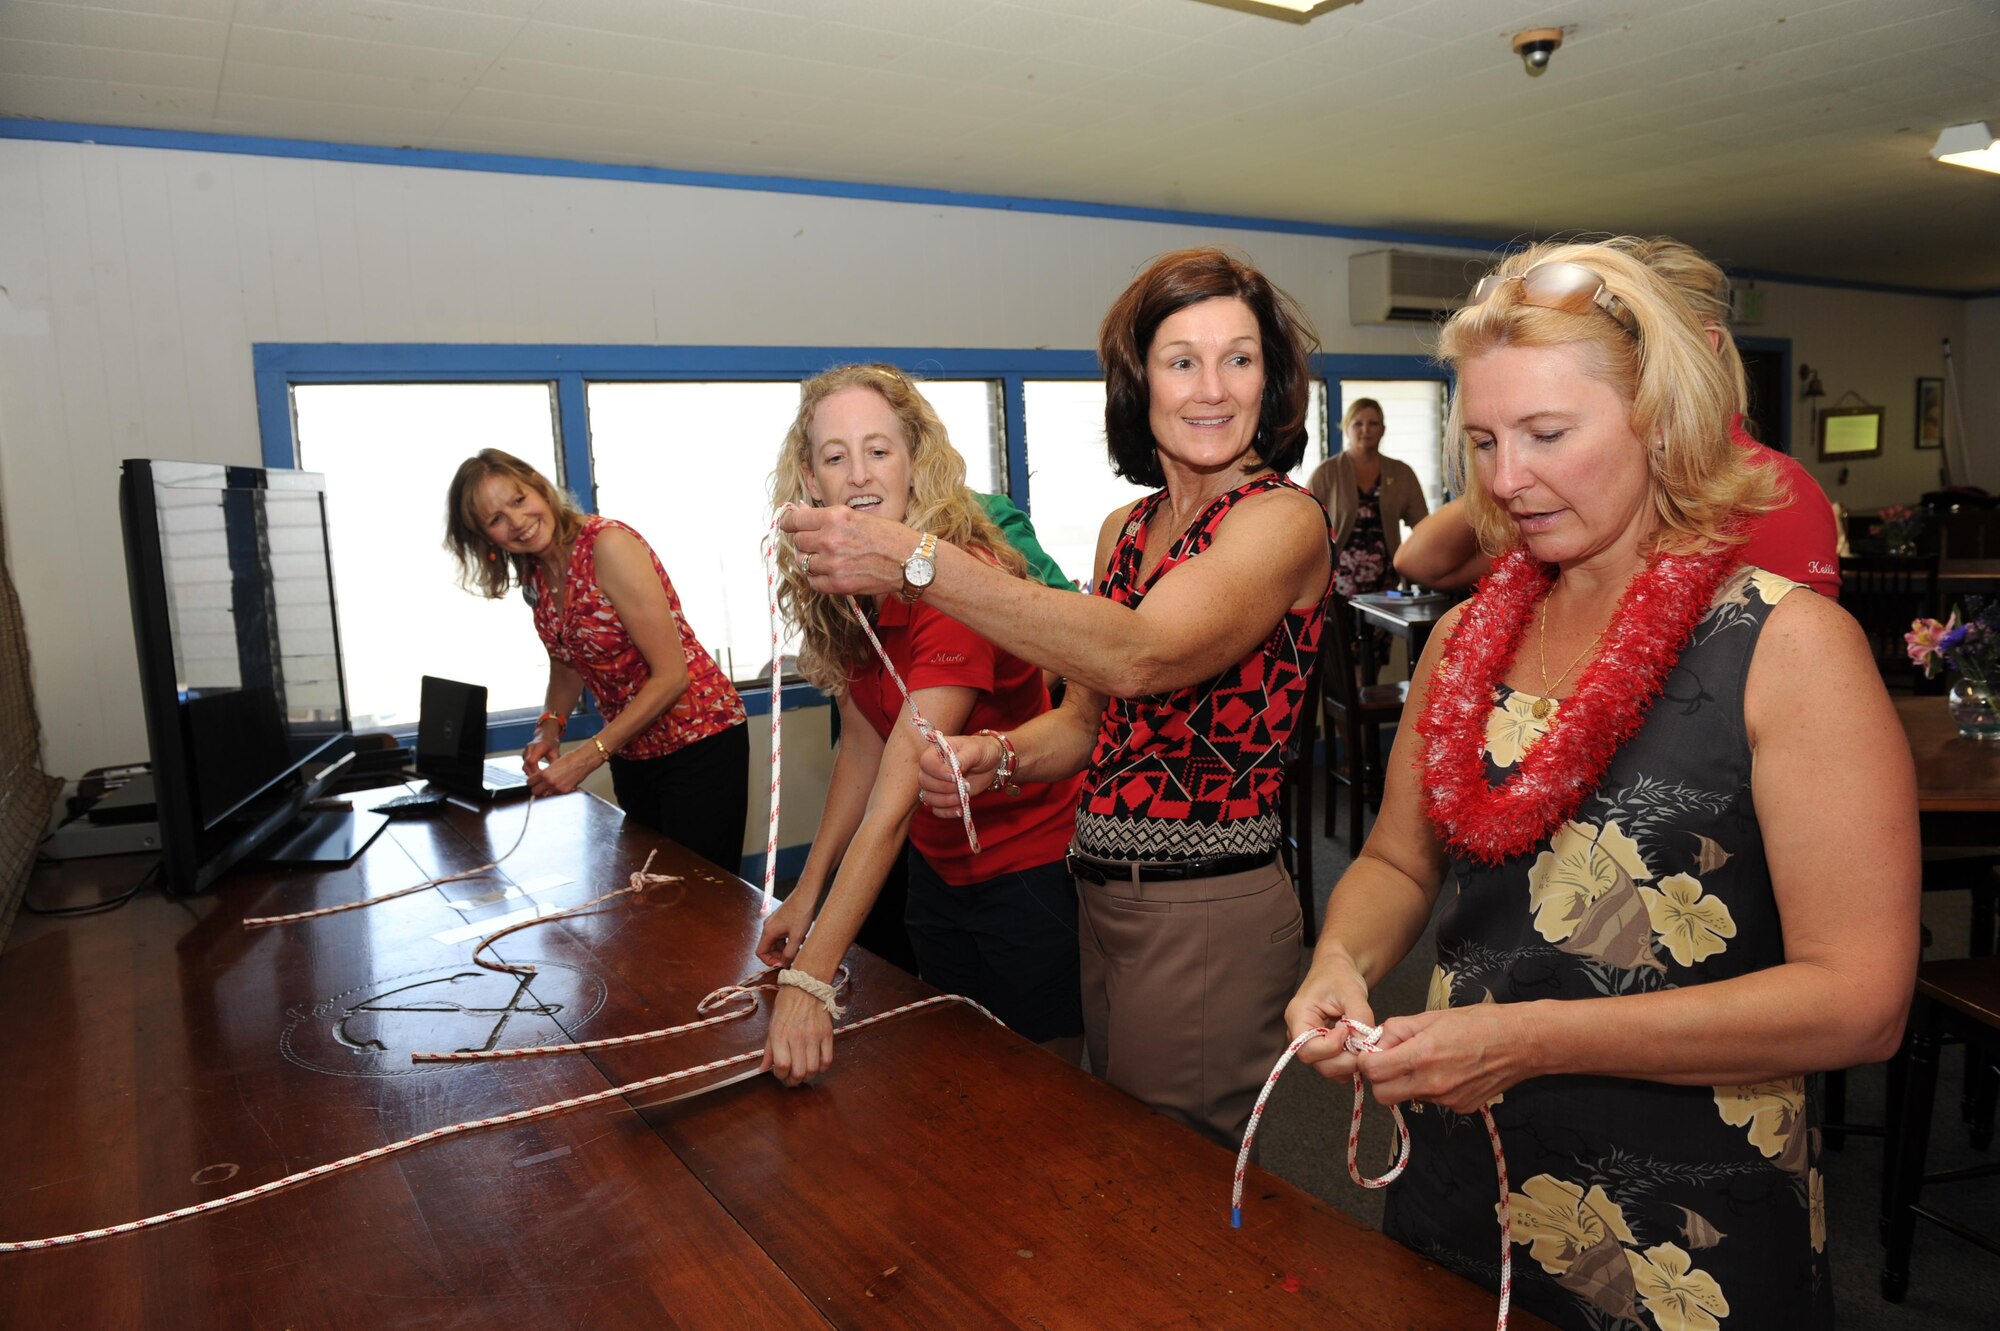 Athena Cody, right, wife of Chief Master Sgt. of the Air Force James A. Cody, and Betty Welsh, wife of Air Force Chief of Staff Gen. Mark A. Welsh III, Marlo Nikkila, Wet Hens treasurer, and Gillian Carlisle, wife of Gen. Hawk Carlisle, commander of Pacific Air Forces, practice tying knots with the spouse's sailing club, 'Wet Hens', at the Outdoor Recreation Center on Joint Base Pearl Harbor-Hickam, Hawaii, Aug. 19, 2013. The visit to Hawaii is part of Gen. Welsh and Chief Cody’s first visit to the Pacific theater and includes stops in Alaska, Japan and the Republic of Korea. Mrs. Welsh and Mrs. Cody met with family members and spouses to discuss opportunities and challenges regarding family care in the Pacific region. (U.S. Air Force photo/Master Sgt. Matthew McGovern)